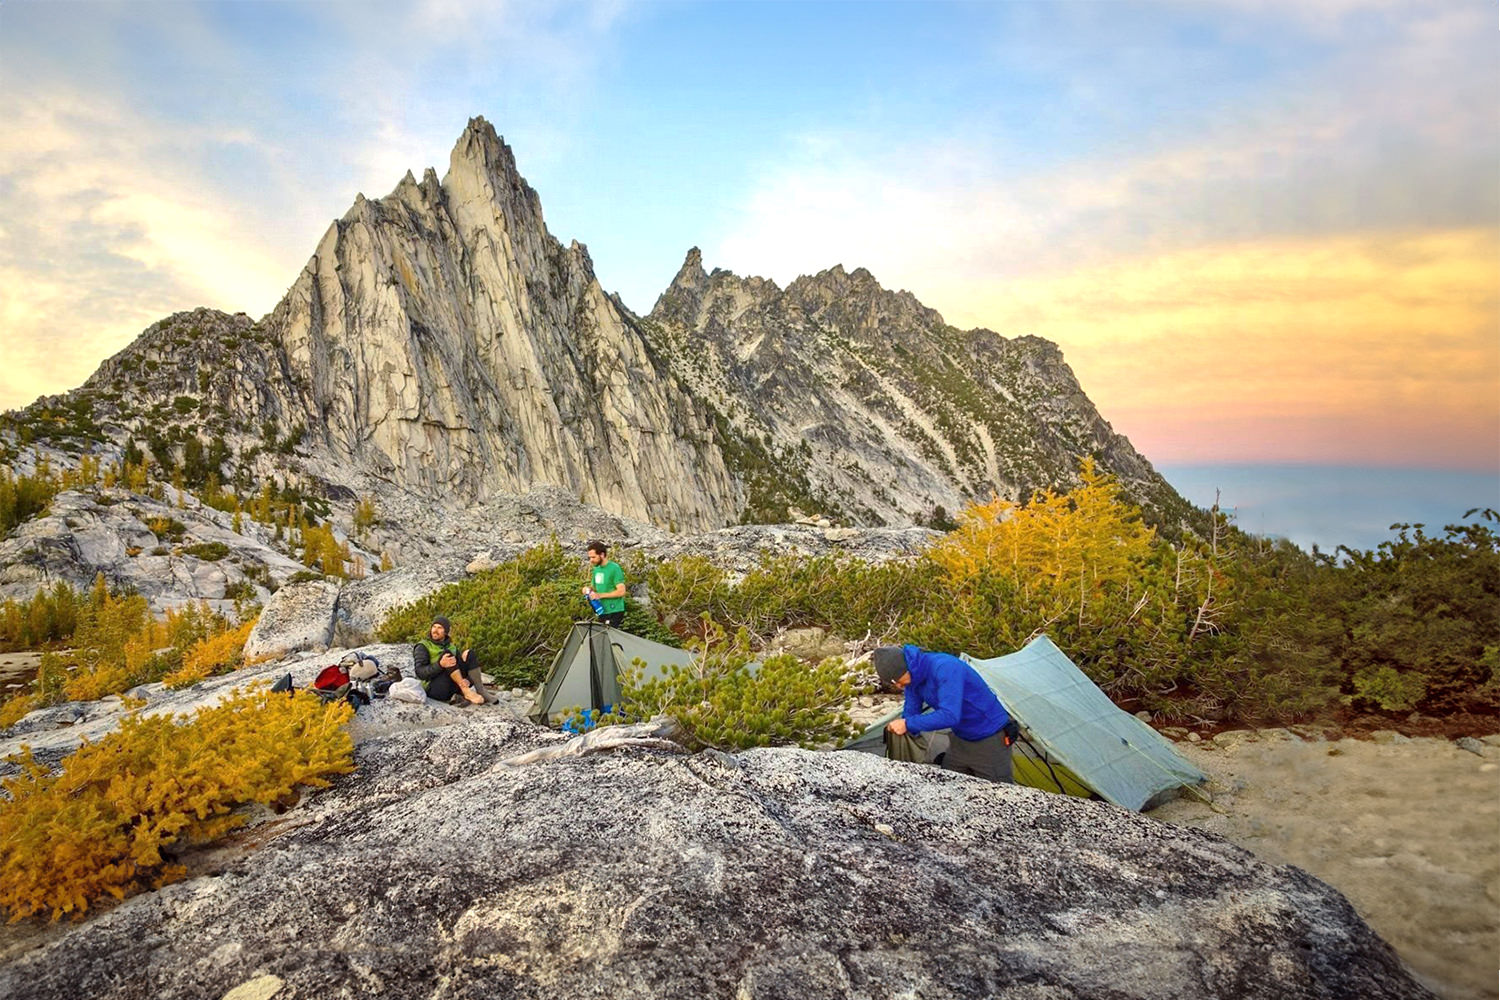 The Zpacks Duplex and Tarptent Motrail ultralight backpacking tents in front of a jagged mountain peak at sunset